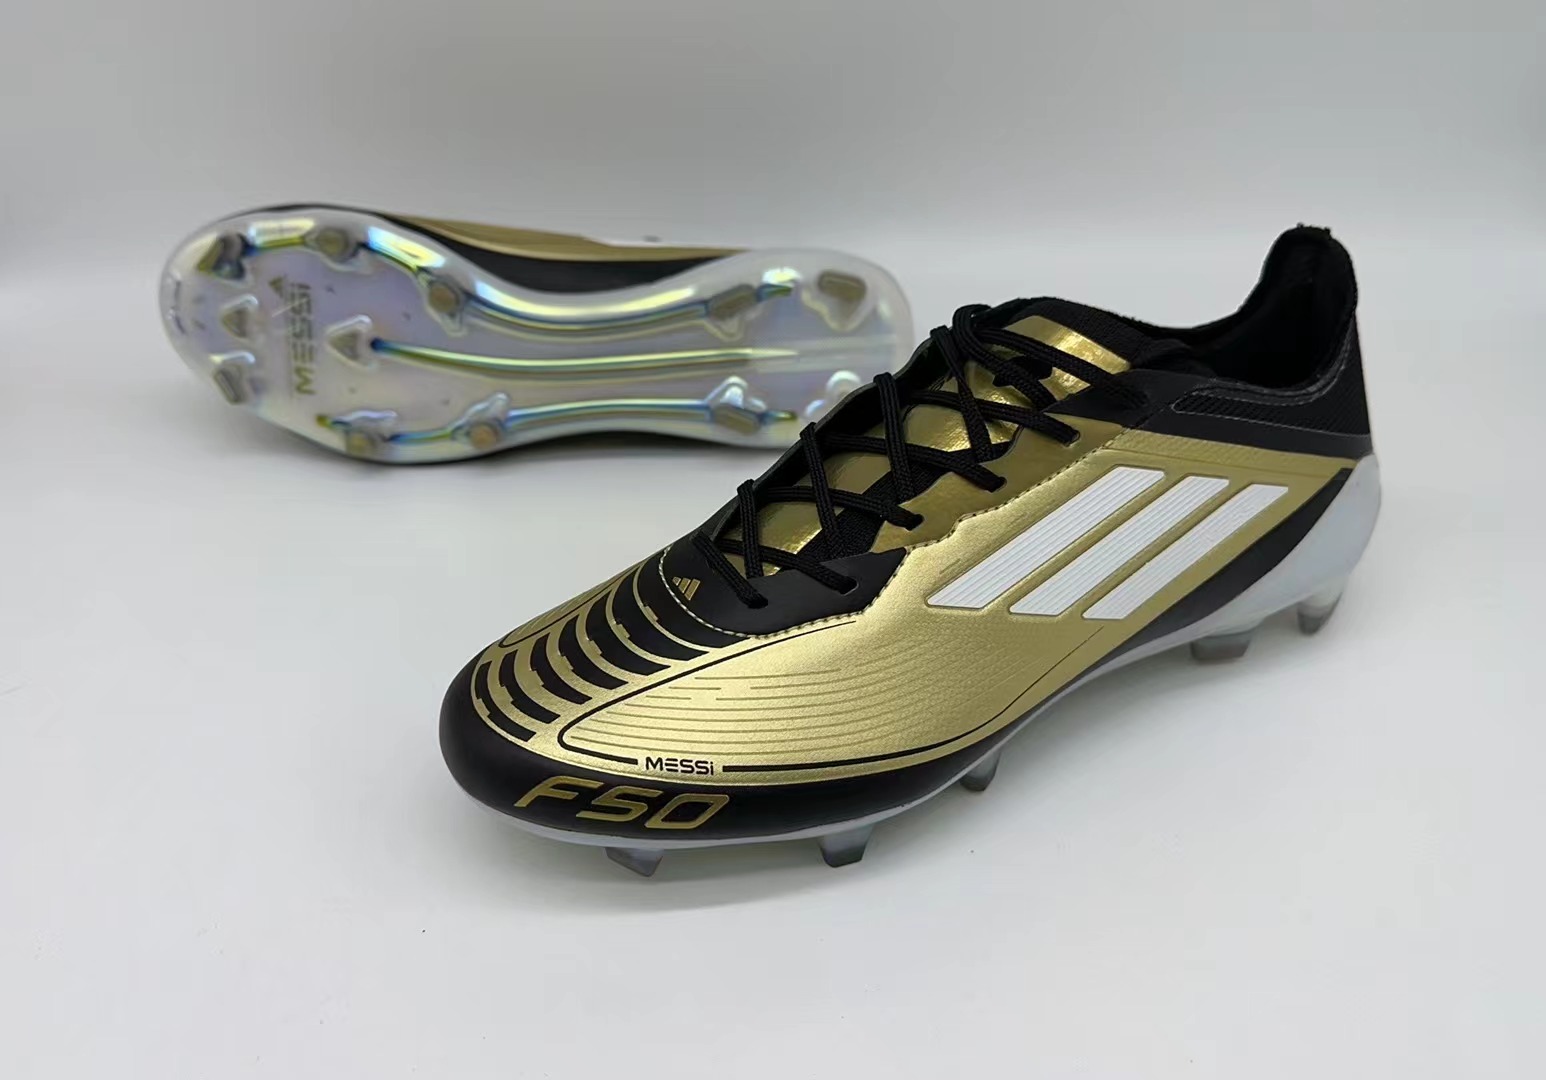 Adidas Soccer Shoes-74